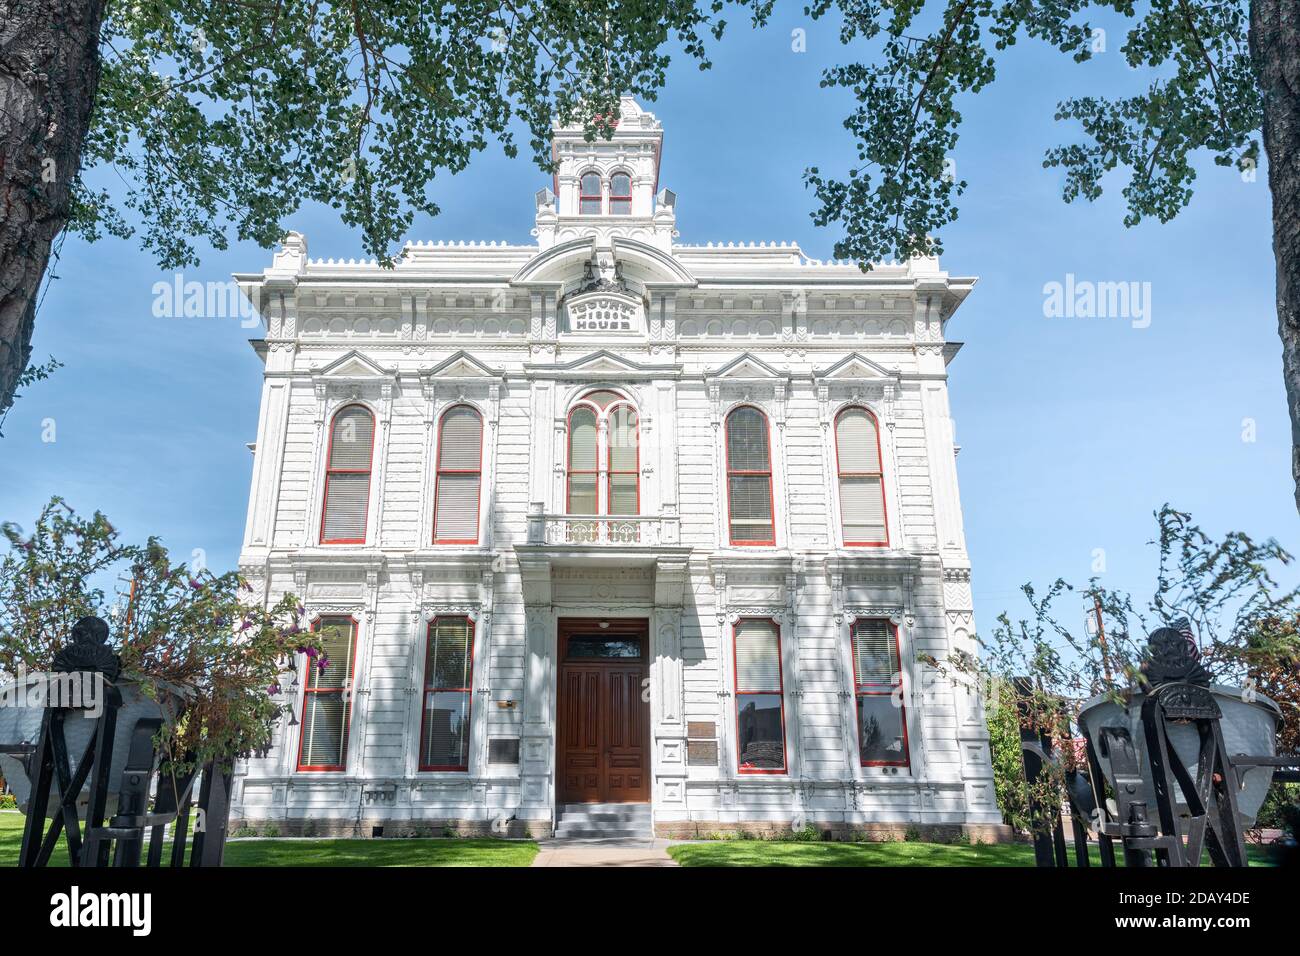 Bridgeport, CA, USA - September 19, 2017: Mono County Courthouse on Main Street in Bridgeport, California, an Italianate style building, built in 1880 Stock Photo